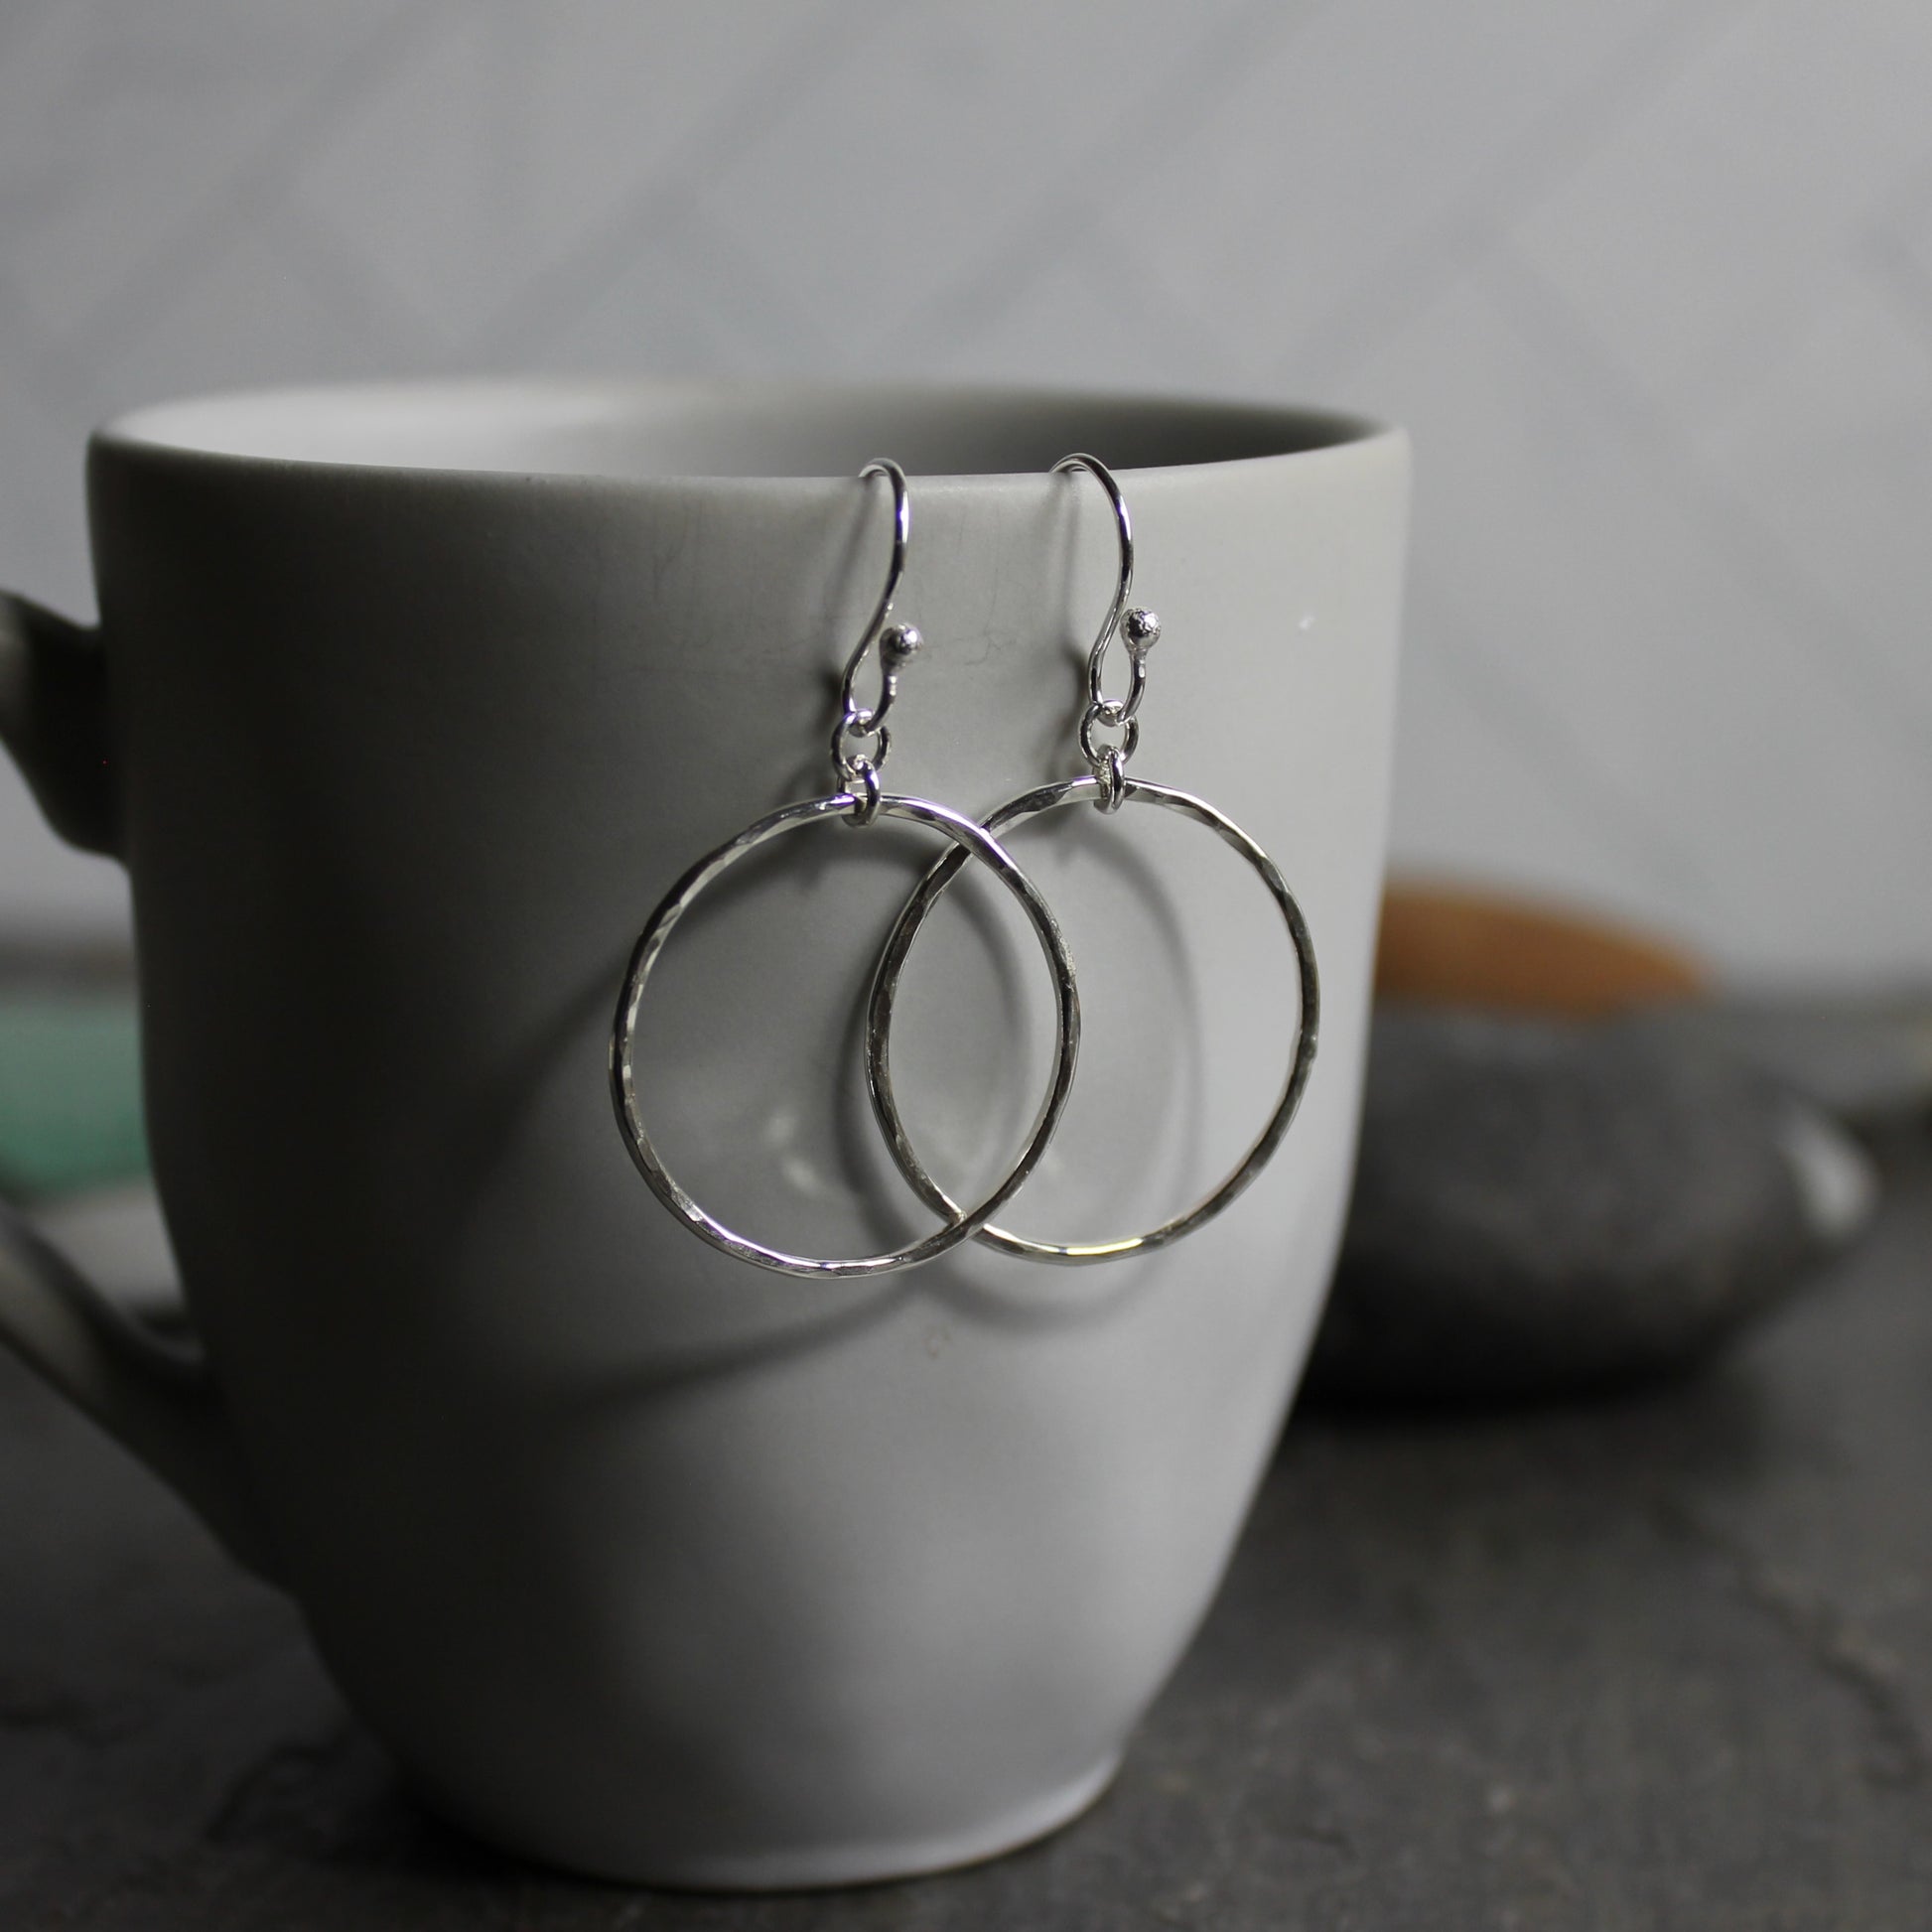 These earrings have 1 inch diameter hammered sterling silver circles attached to handmade ear wires.